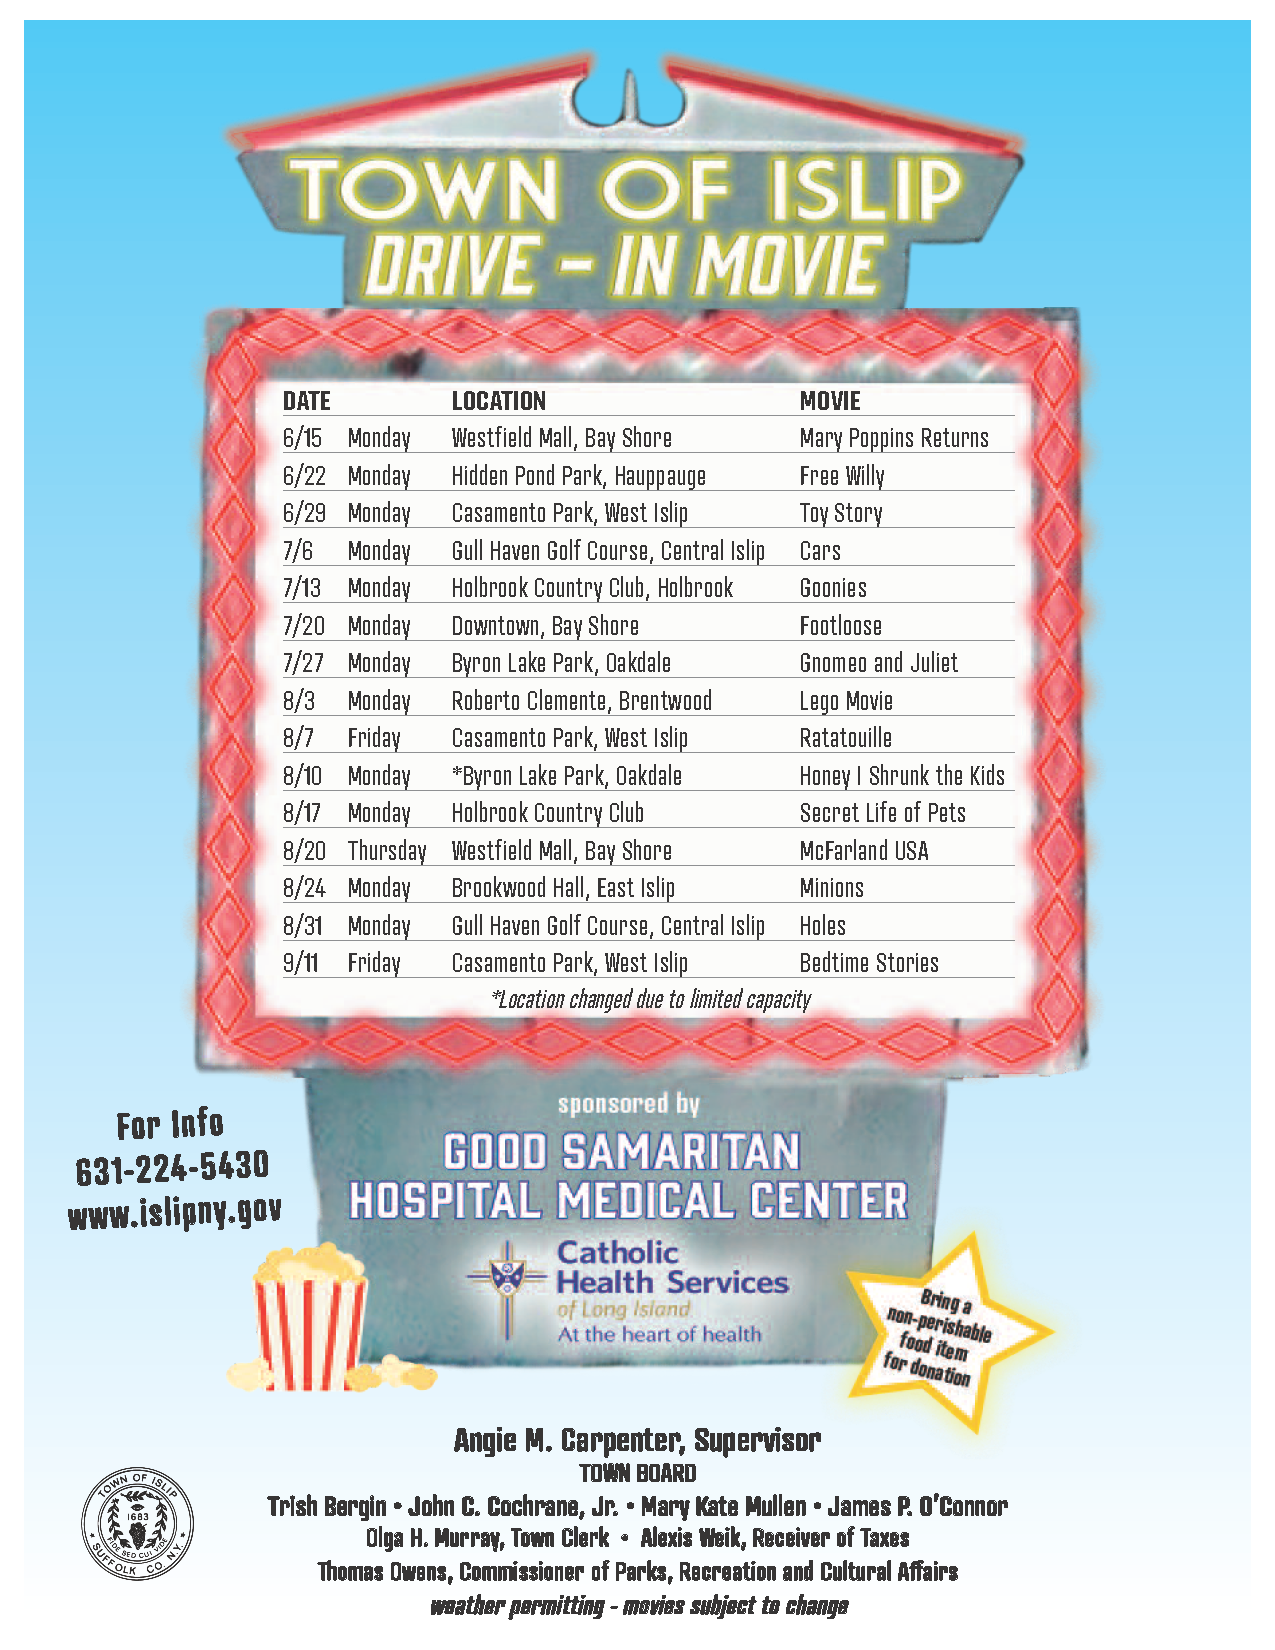 list of all movies this summer, call 631-224-5430 for more info